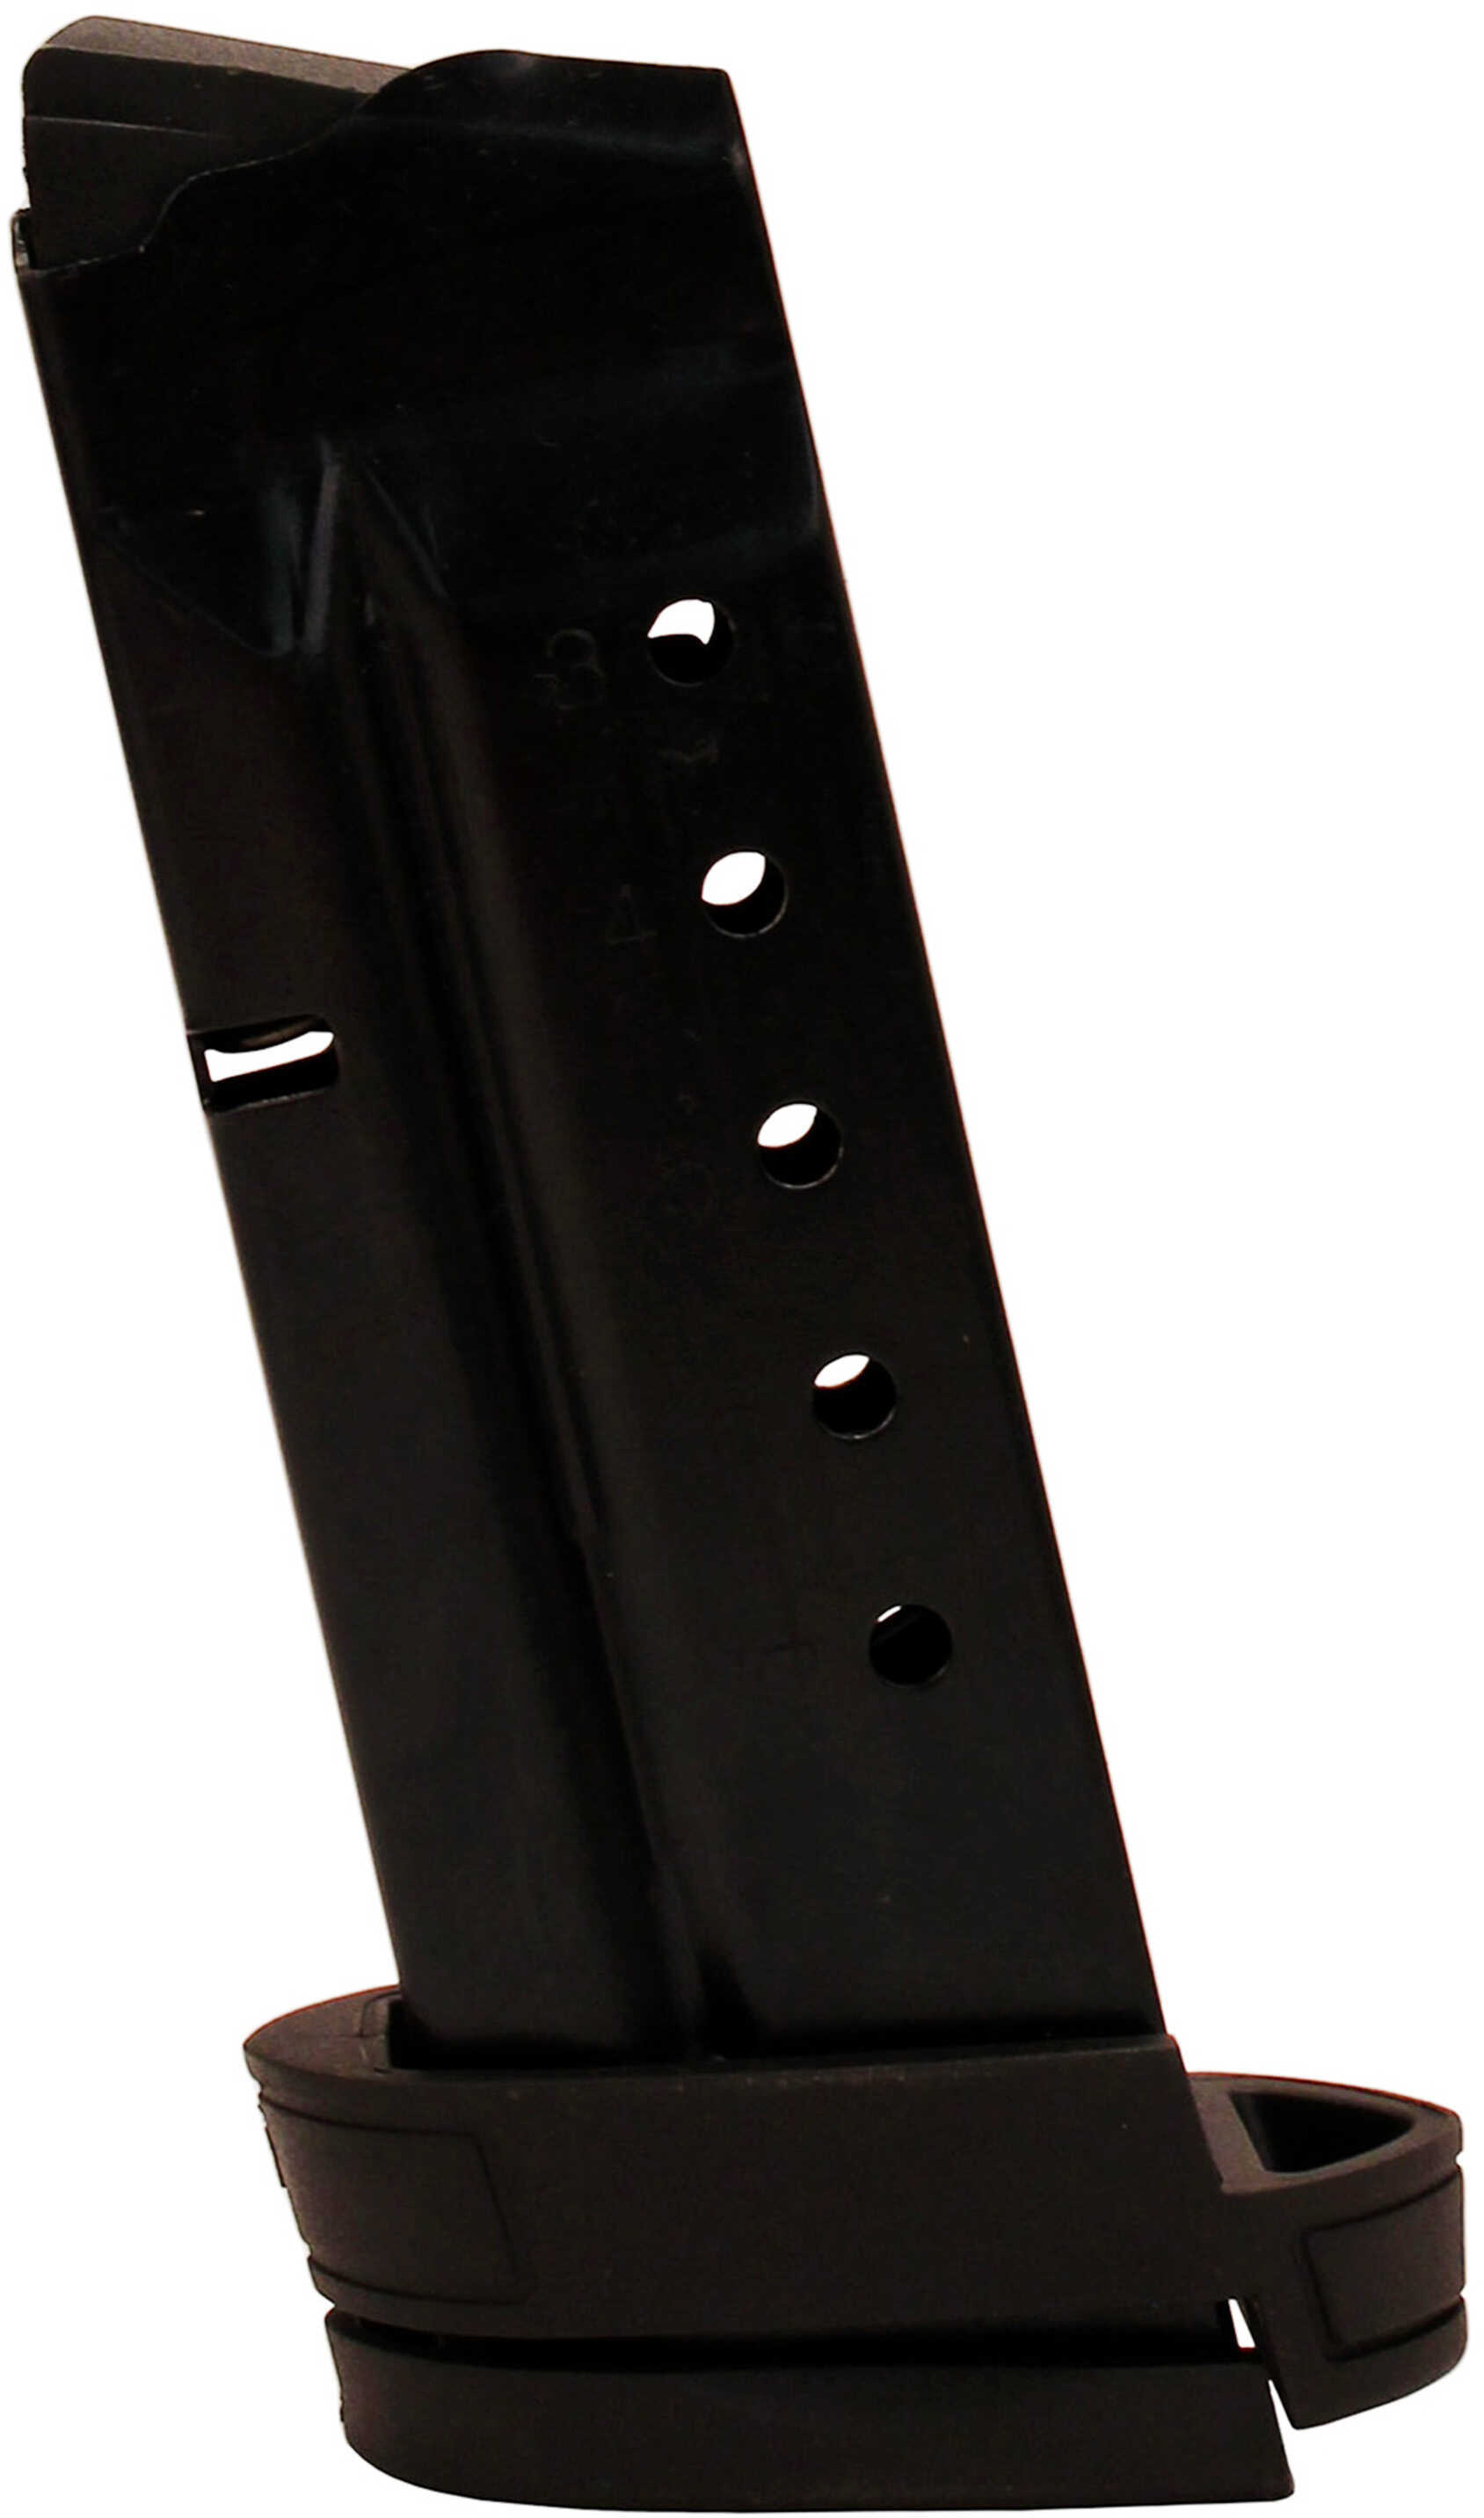 ProMag Smith & Wesson Shield .40 Caliber 7-Round Magazine Blue Steel Md: 30